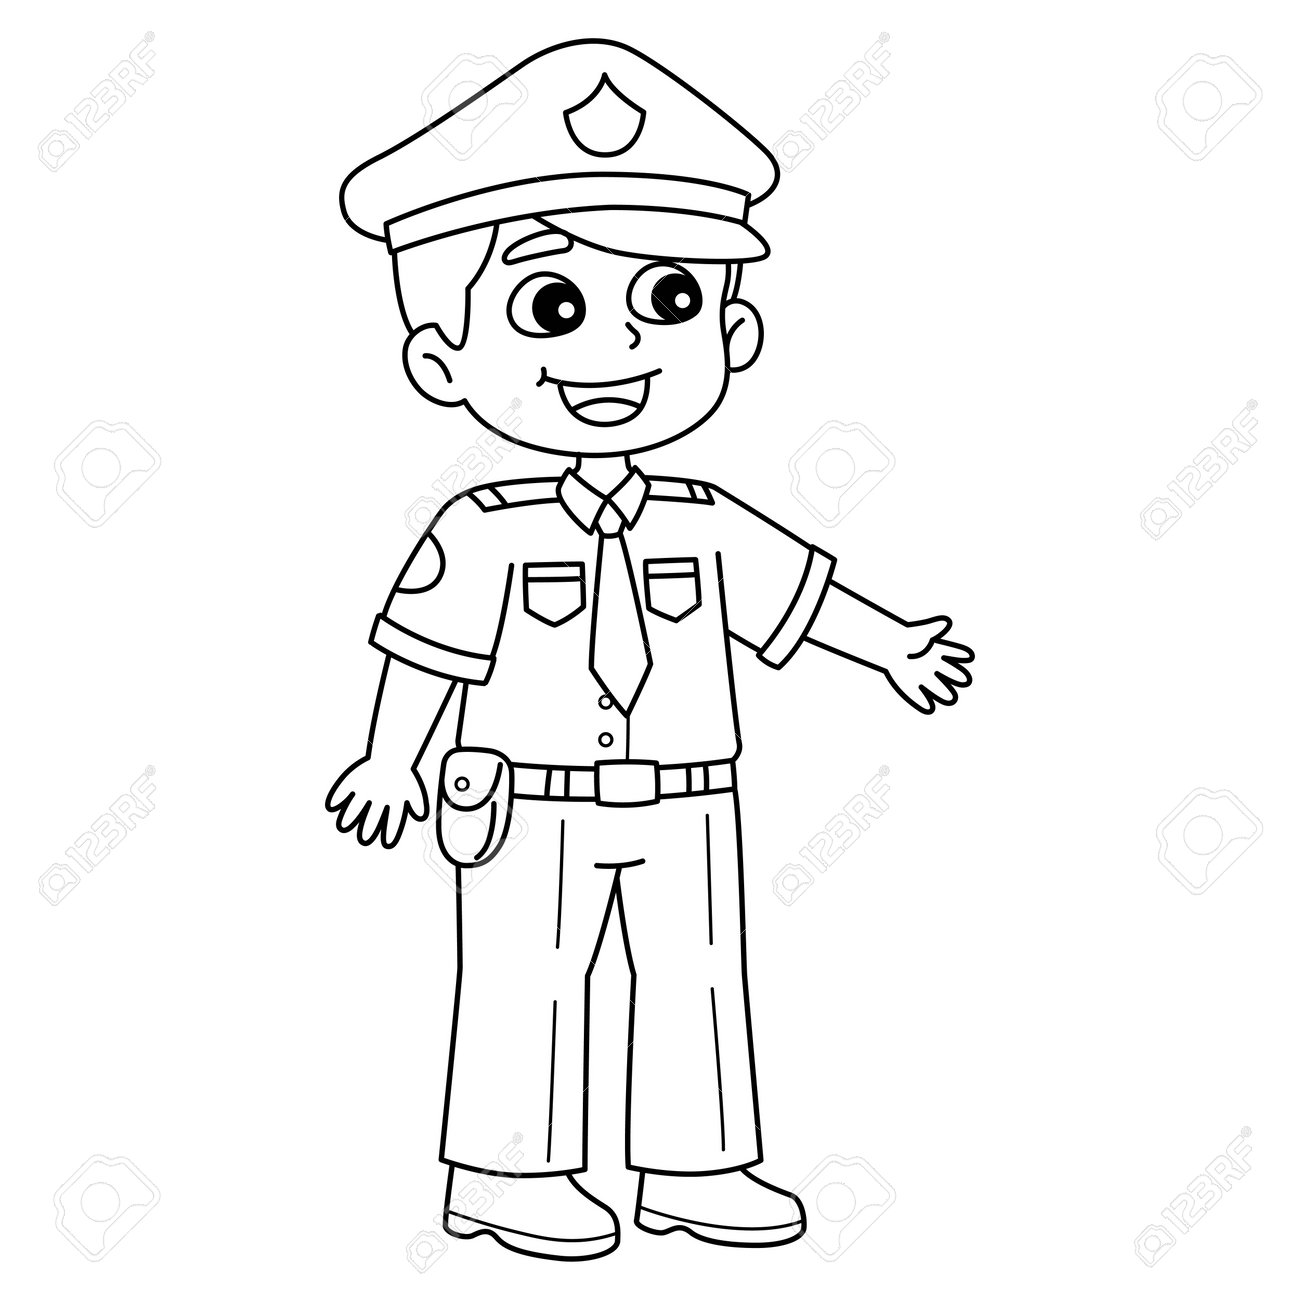 Policeman isolated coloring page for kids royalty free svg cliparts vectors and stock illustration image